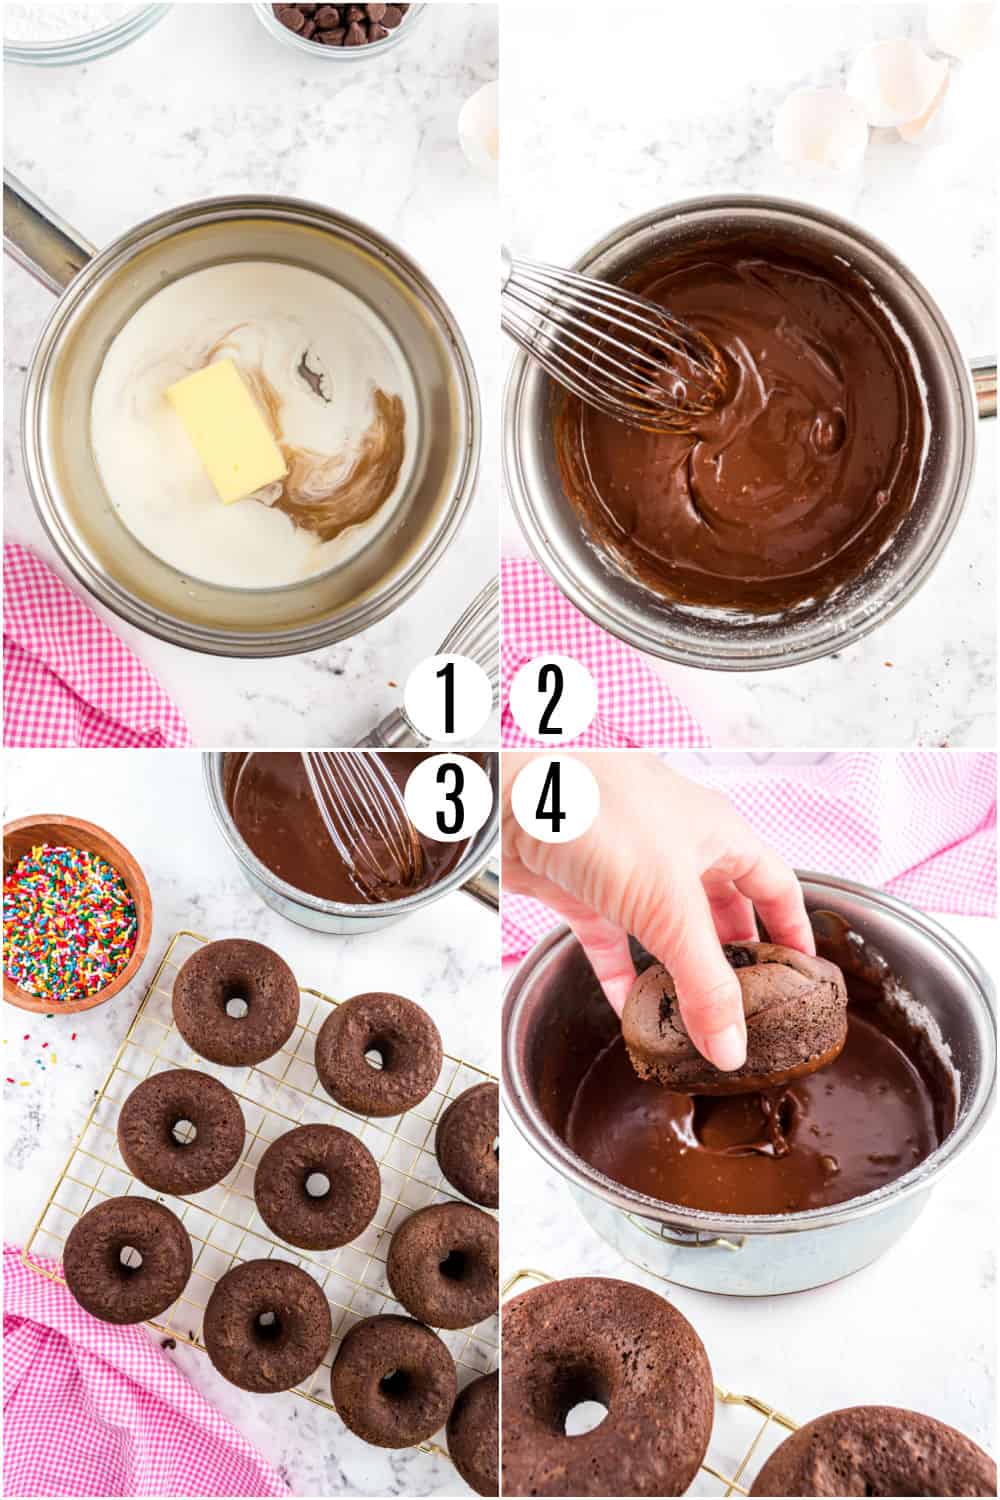 Step by step photos showing how to make chocolate glaze for donuts